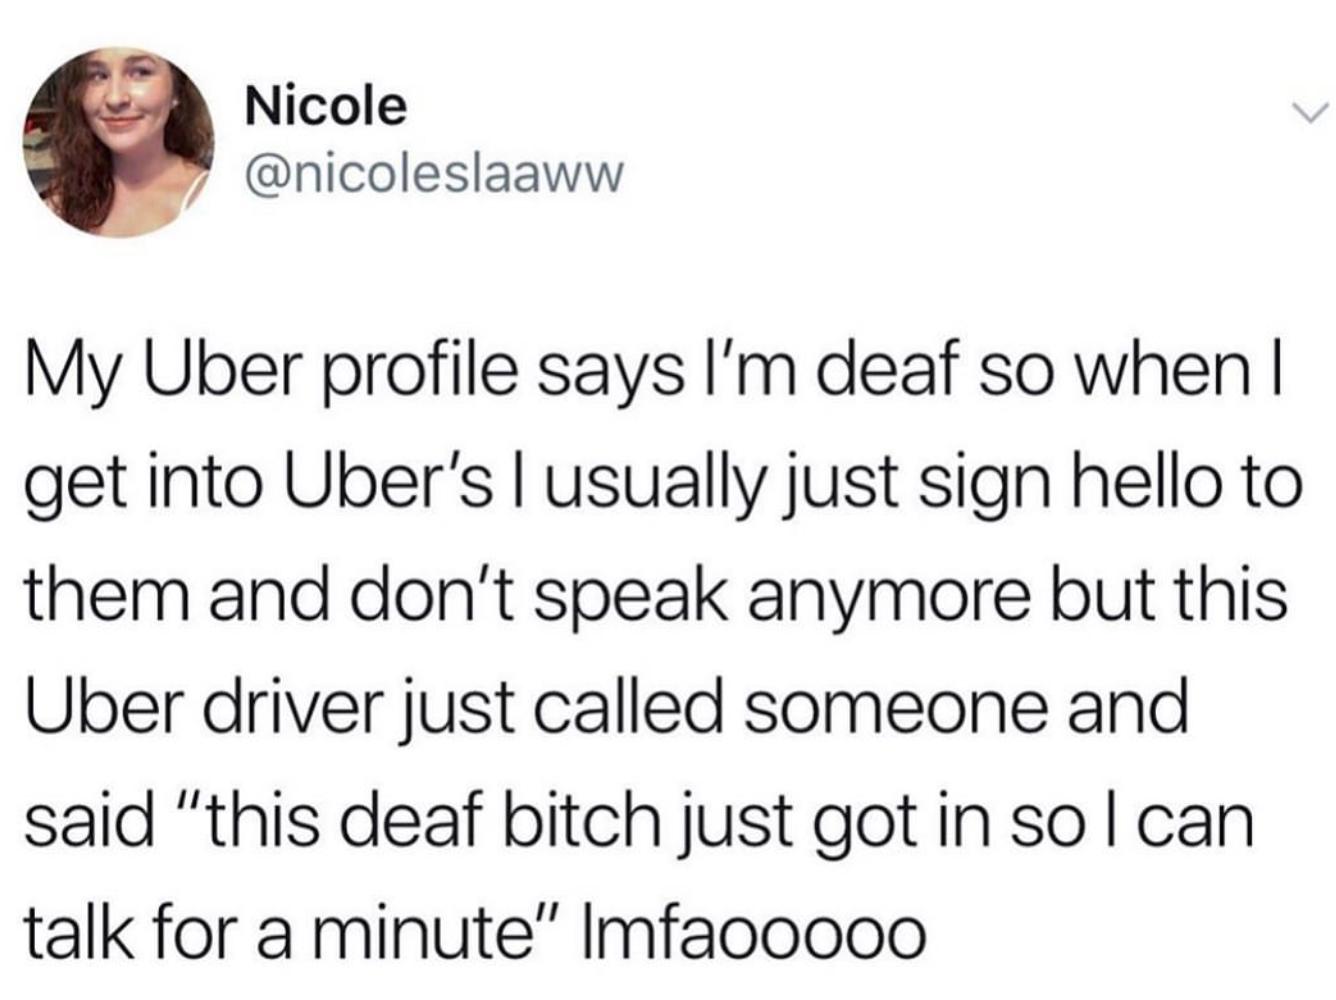 olive garden family meme - Nicole My Uber profile says I'm deaf so when | get into Uber's I usually just sign hello to them and don't speak anymore but this Uber driver just called someone and said